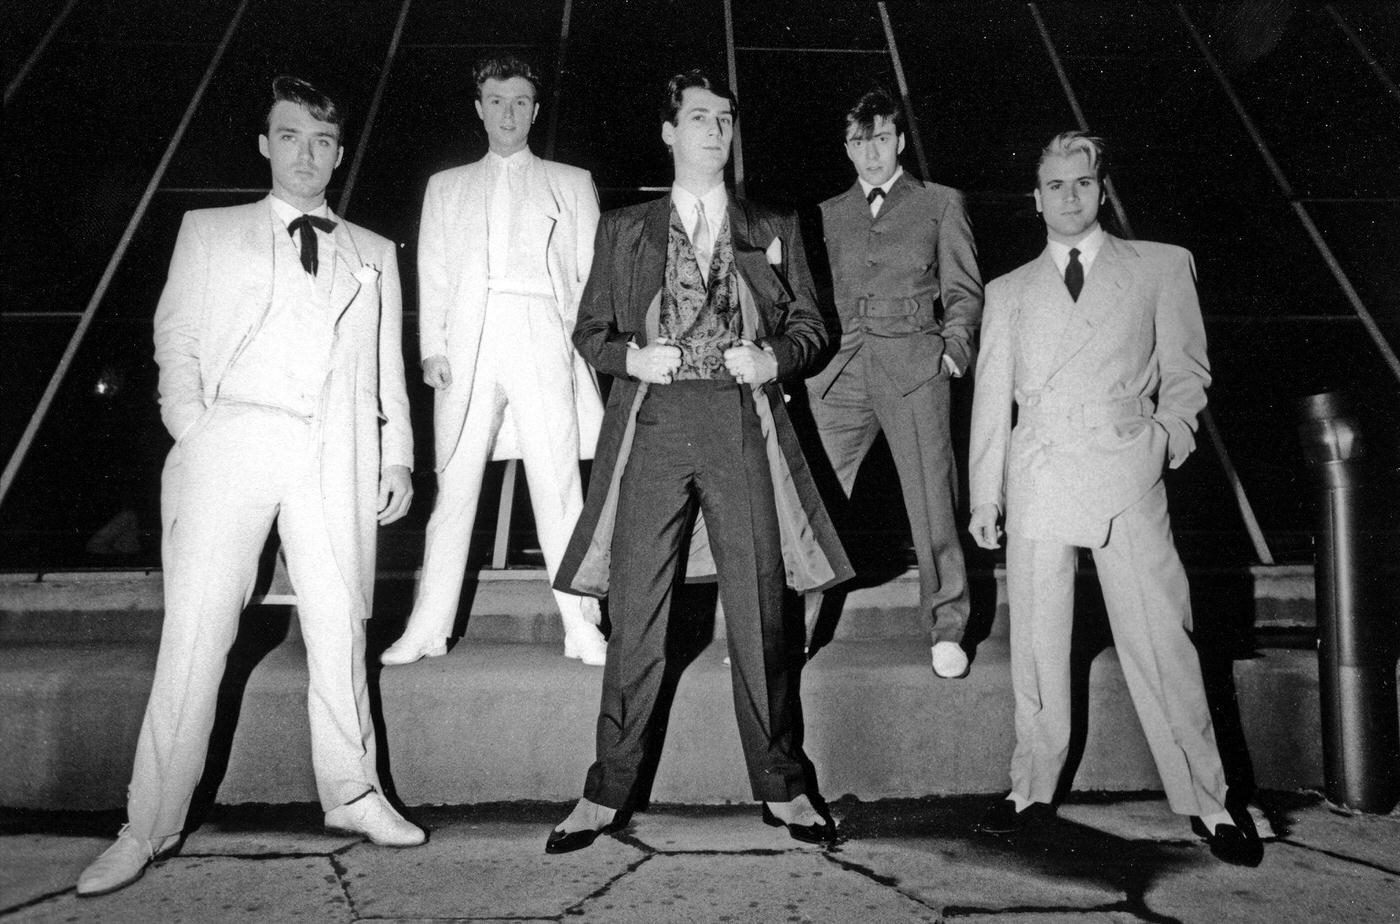 The Hook-Filled Rhythms Of Spandau Ballet: A Night To Remember In 1981 New York